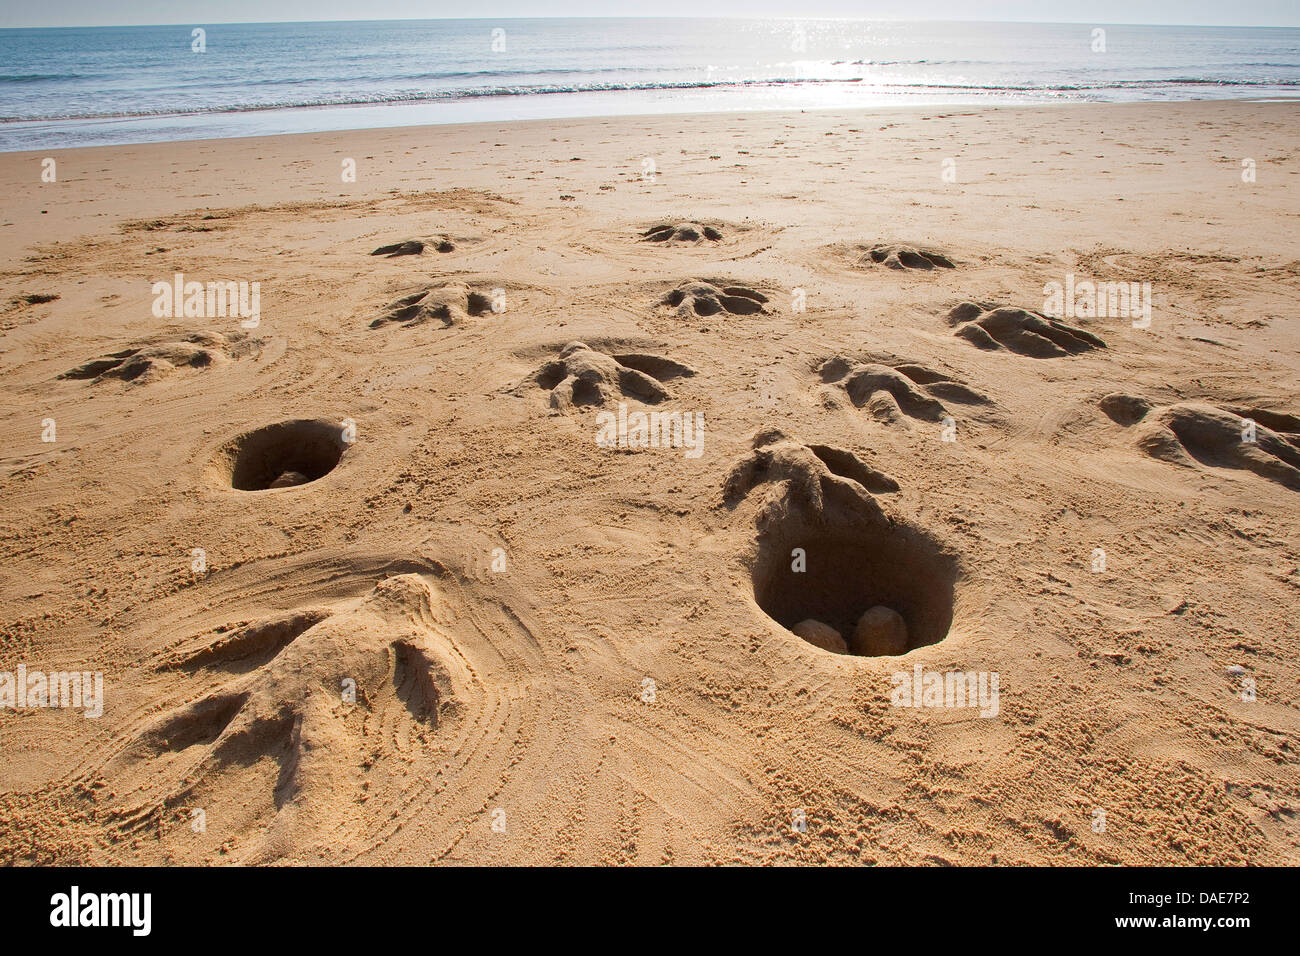 sea turtles hatching and creeping to the sea formed at the beach in the sand, Italy, Sicilia Stock Photo